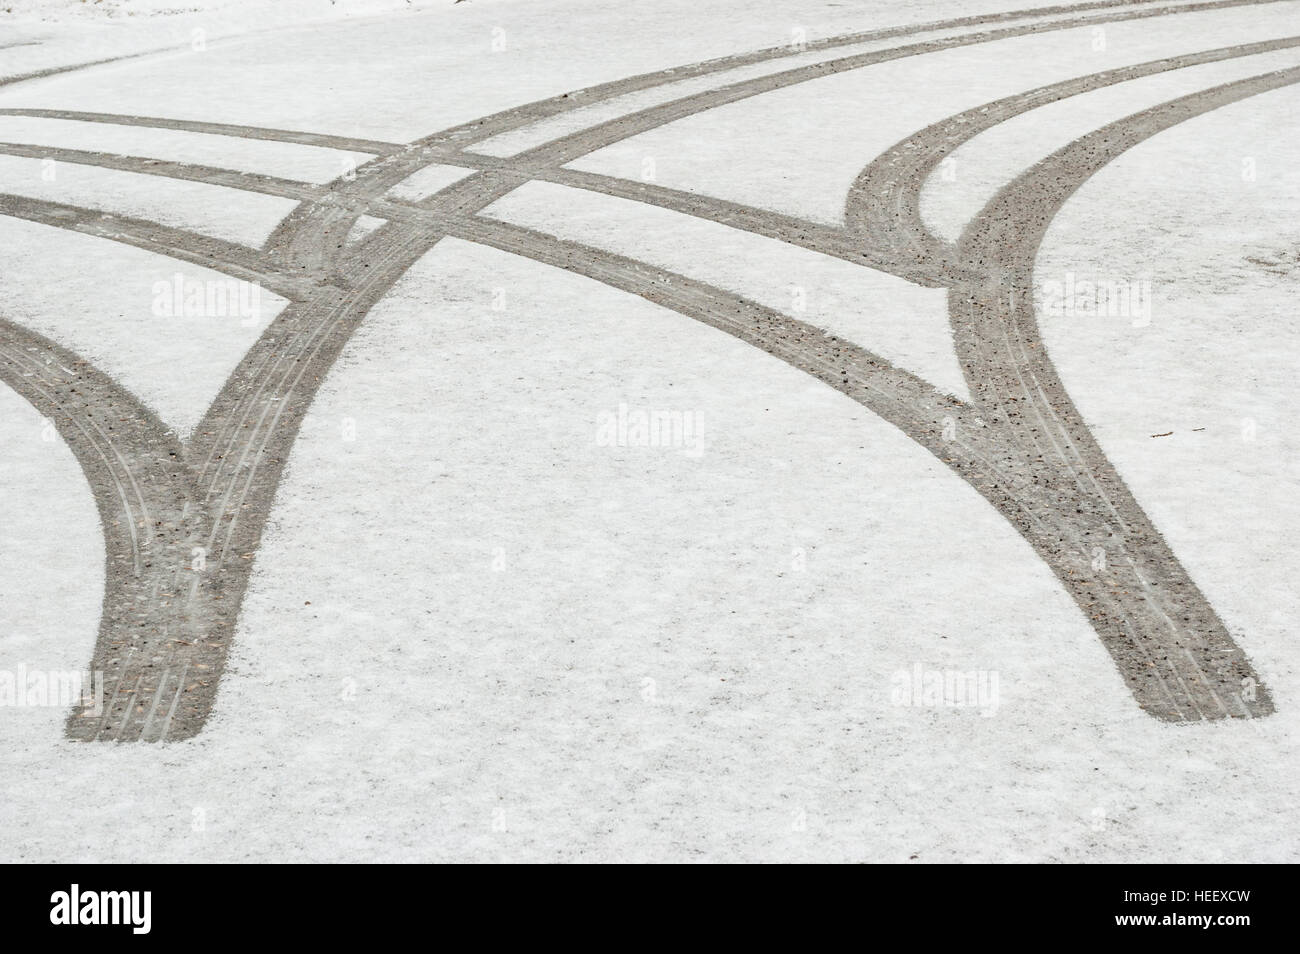 Tire tracks / markings in fresh snow on a paved road. Stock Photo